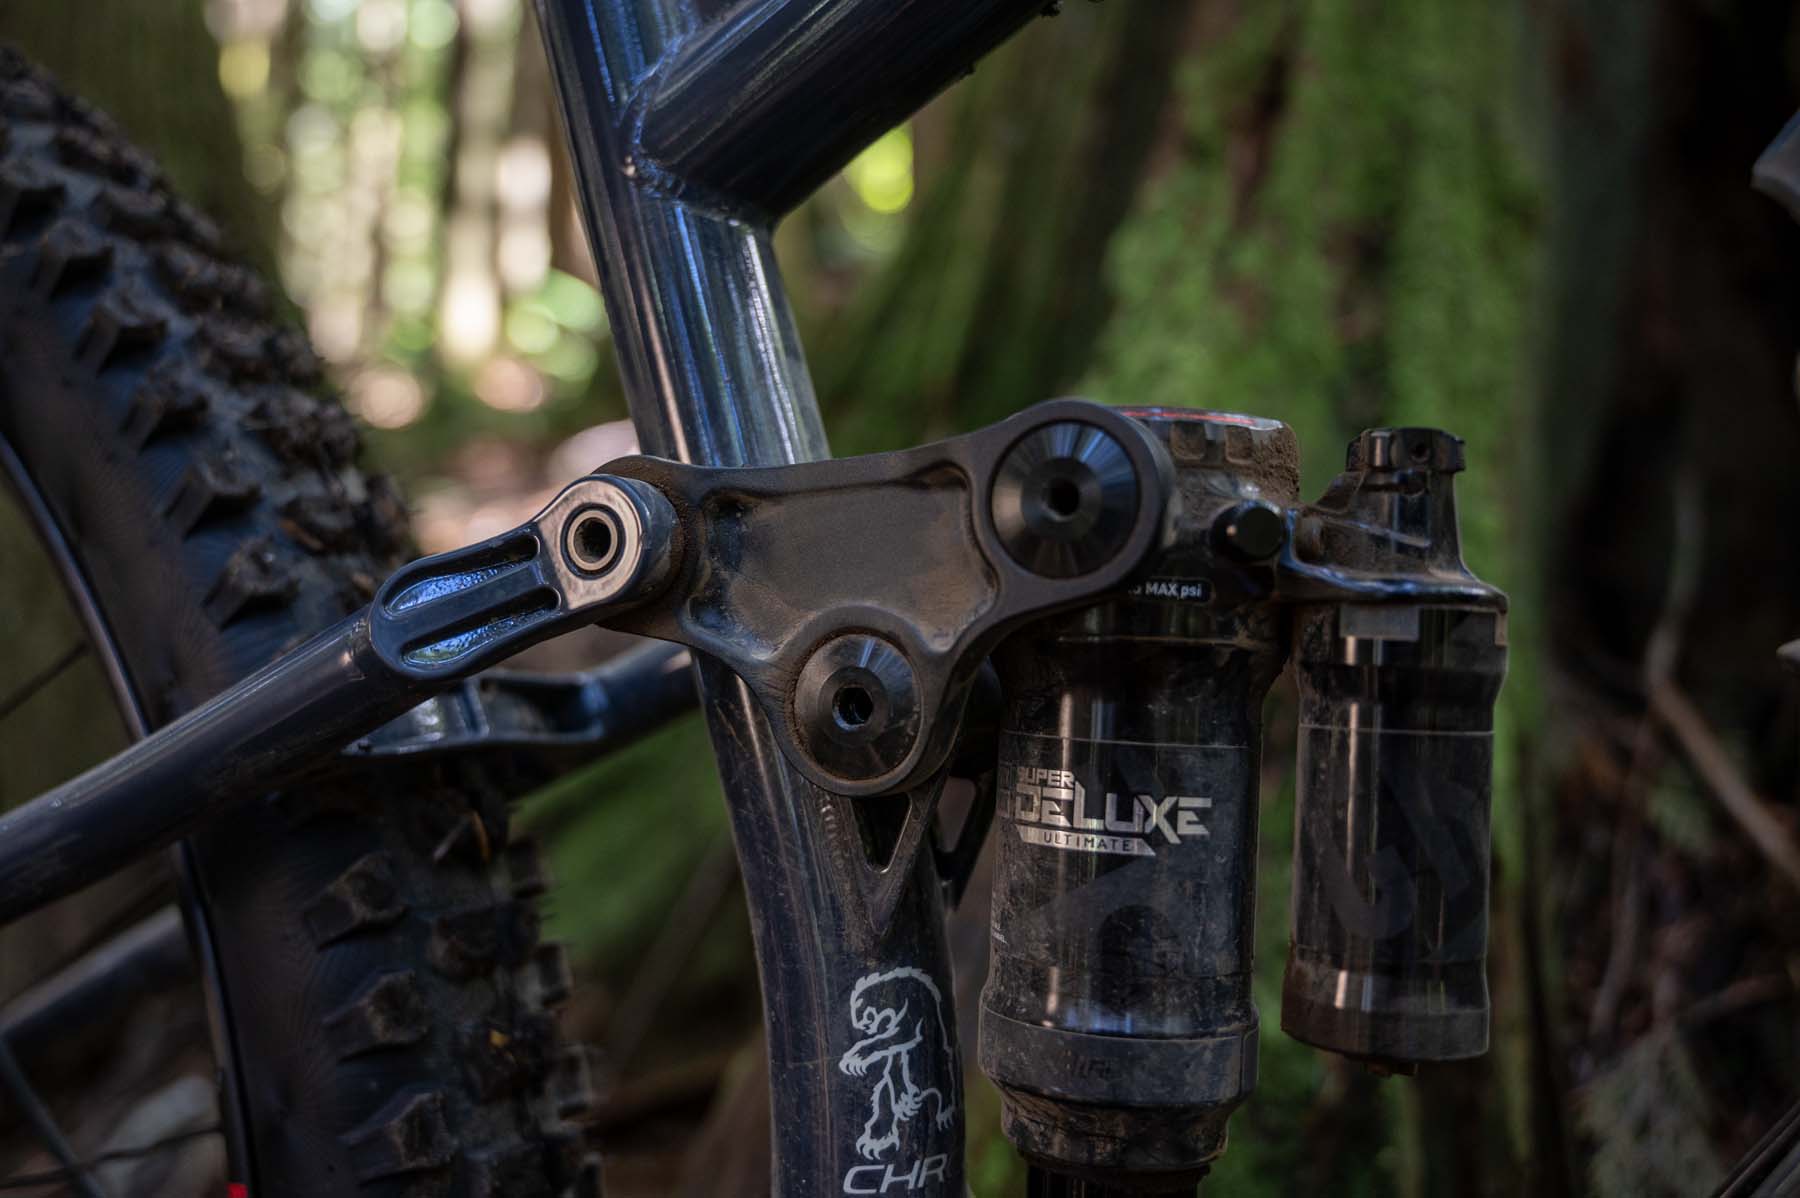 David Golay reviews the Chromag Darco for Blister